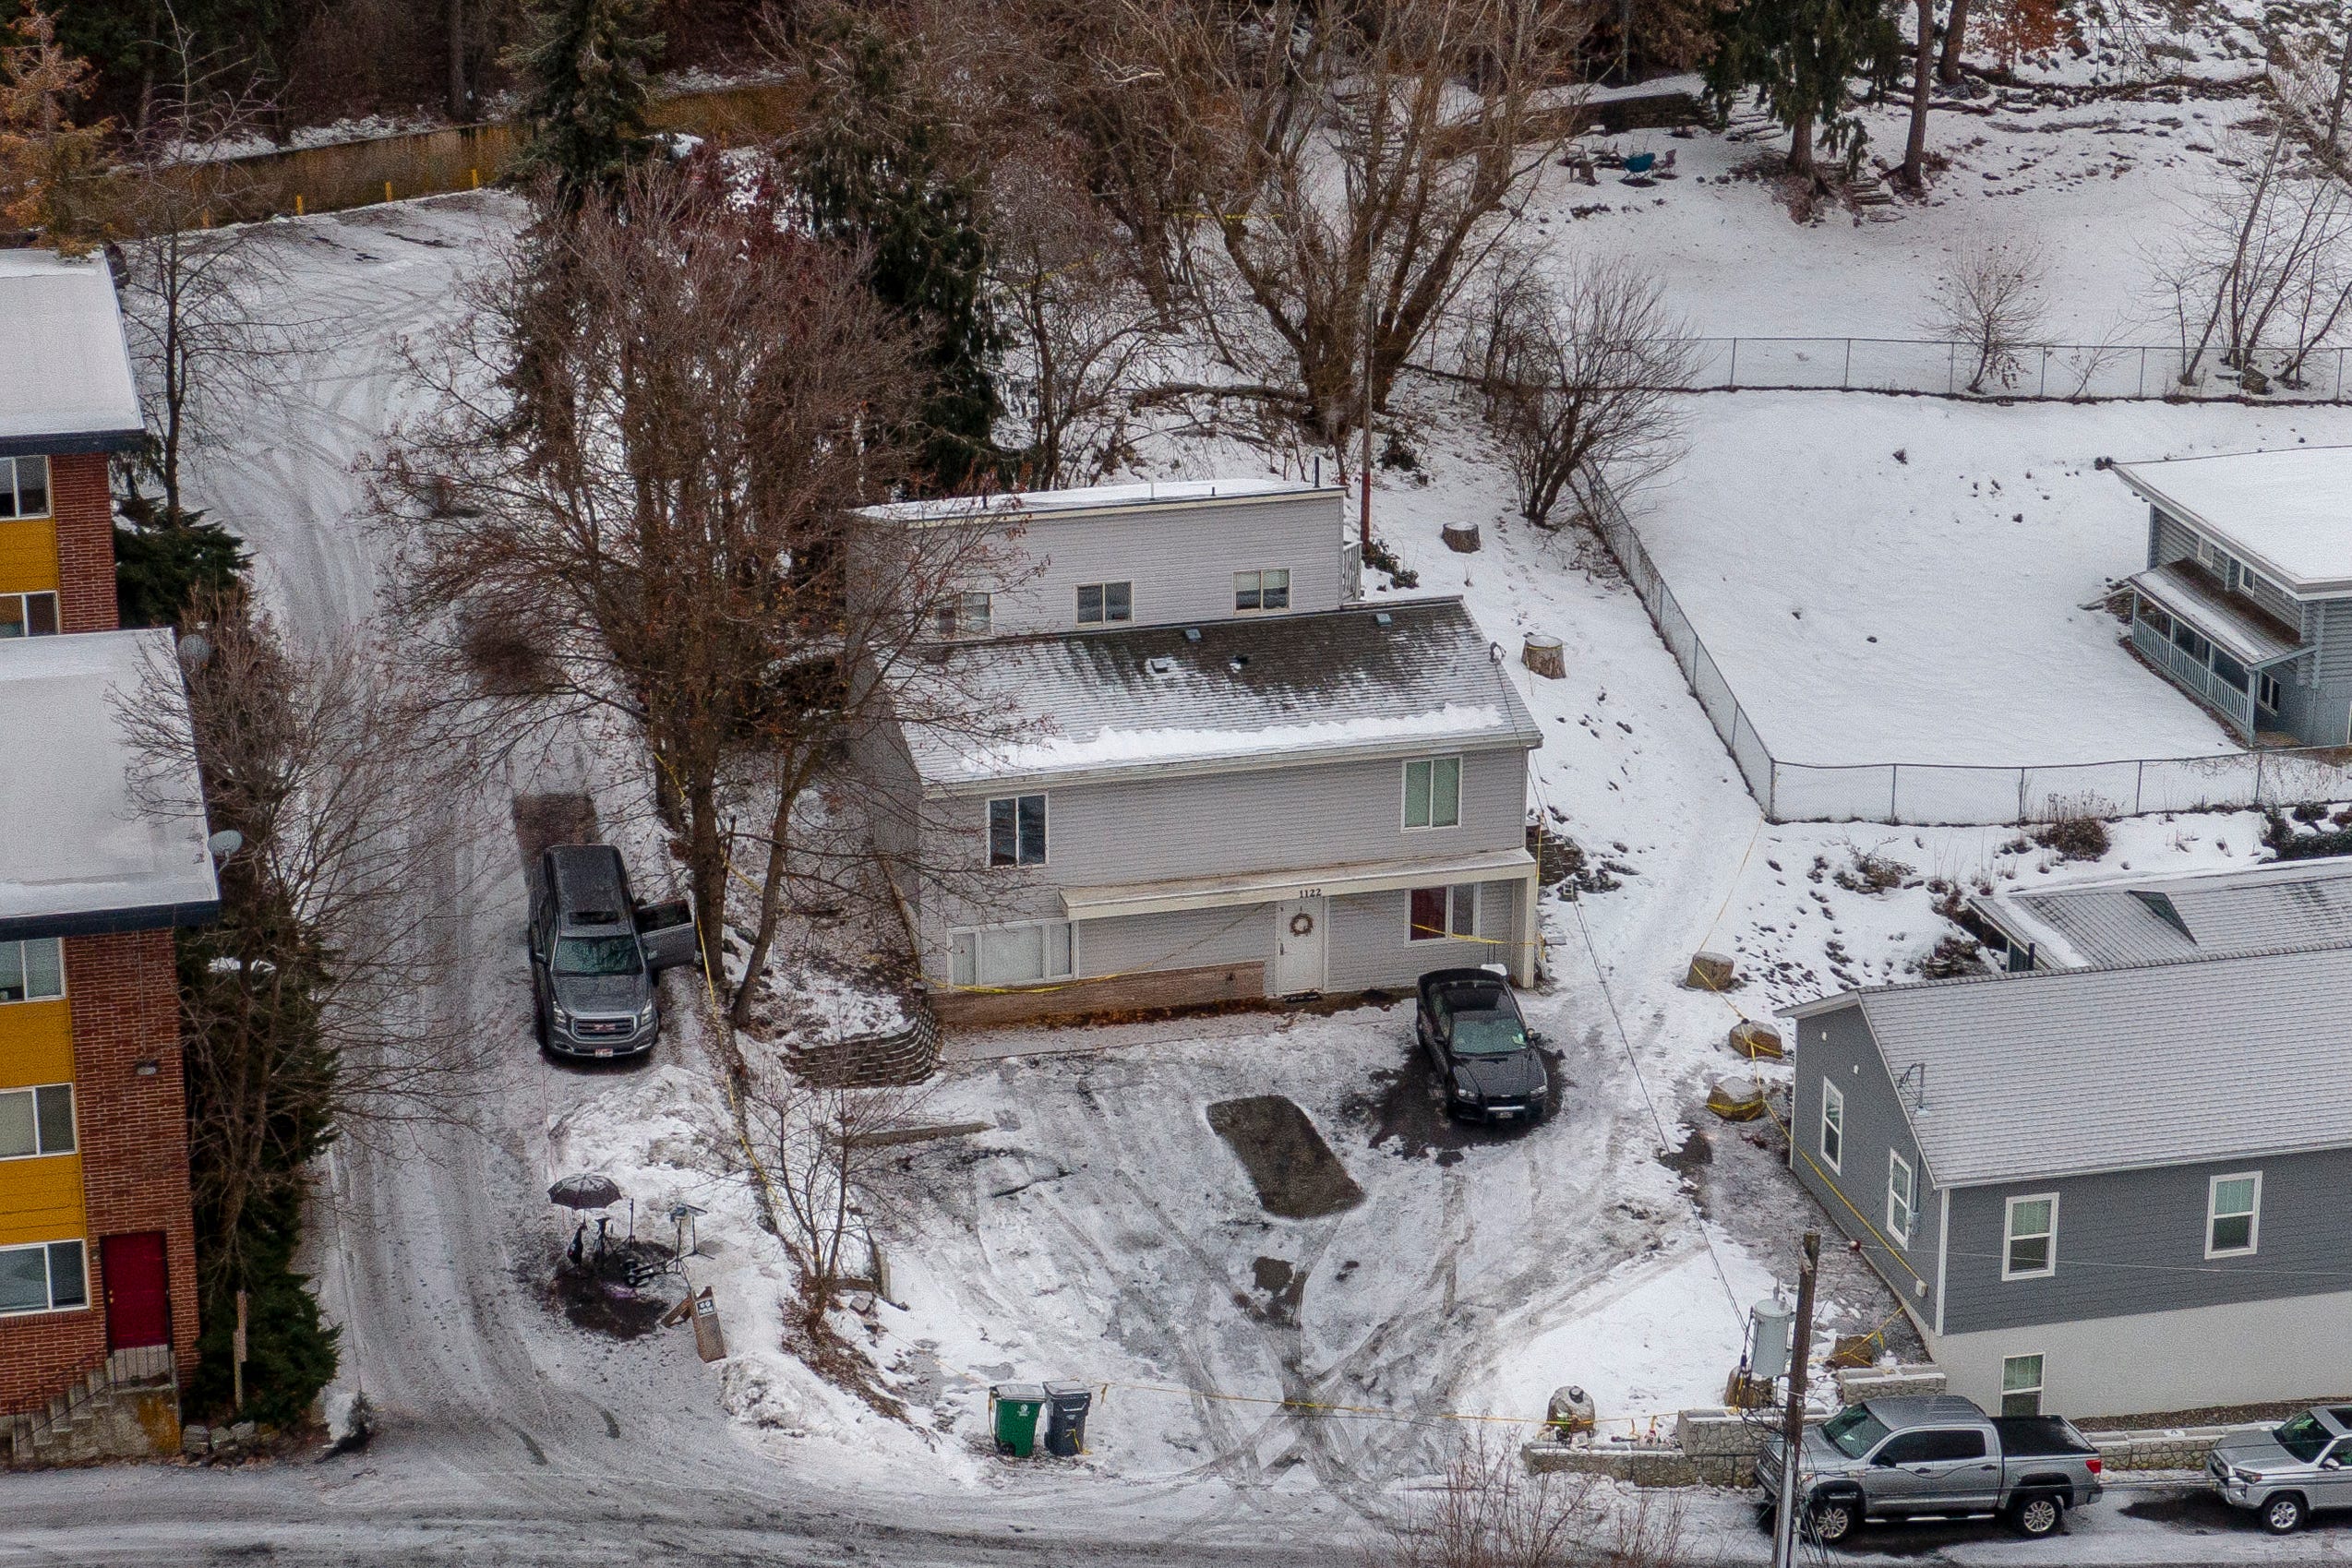 The rental home where four students were stabbed to death in Moscow, Idaho.